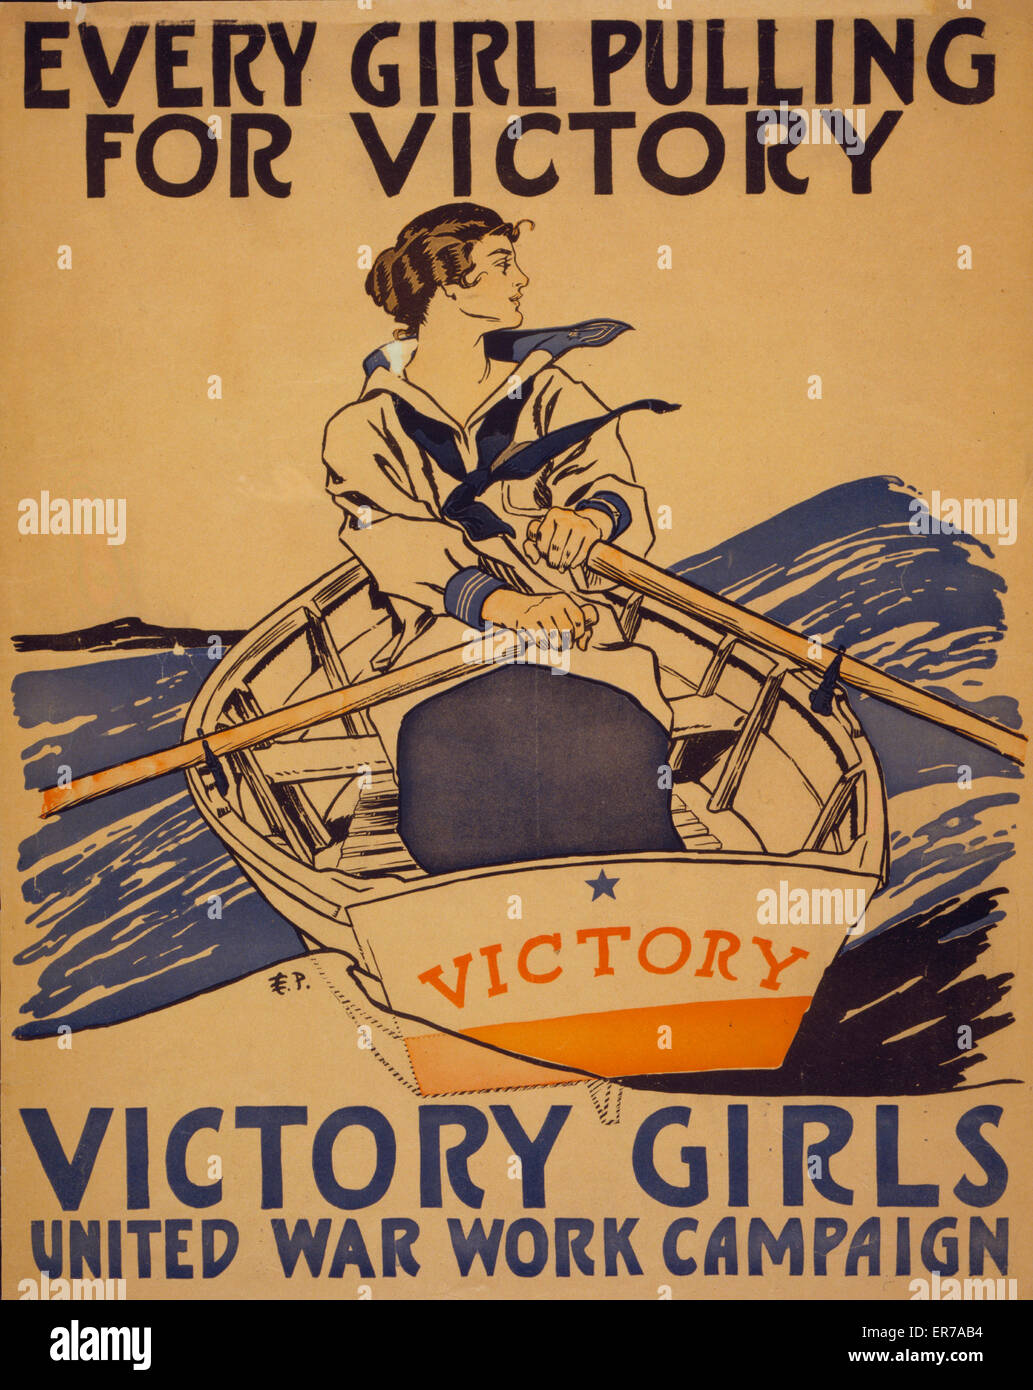 Every girl pulling for victory - Victory Girls United War Wo Stock Photo